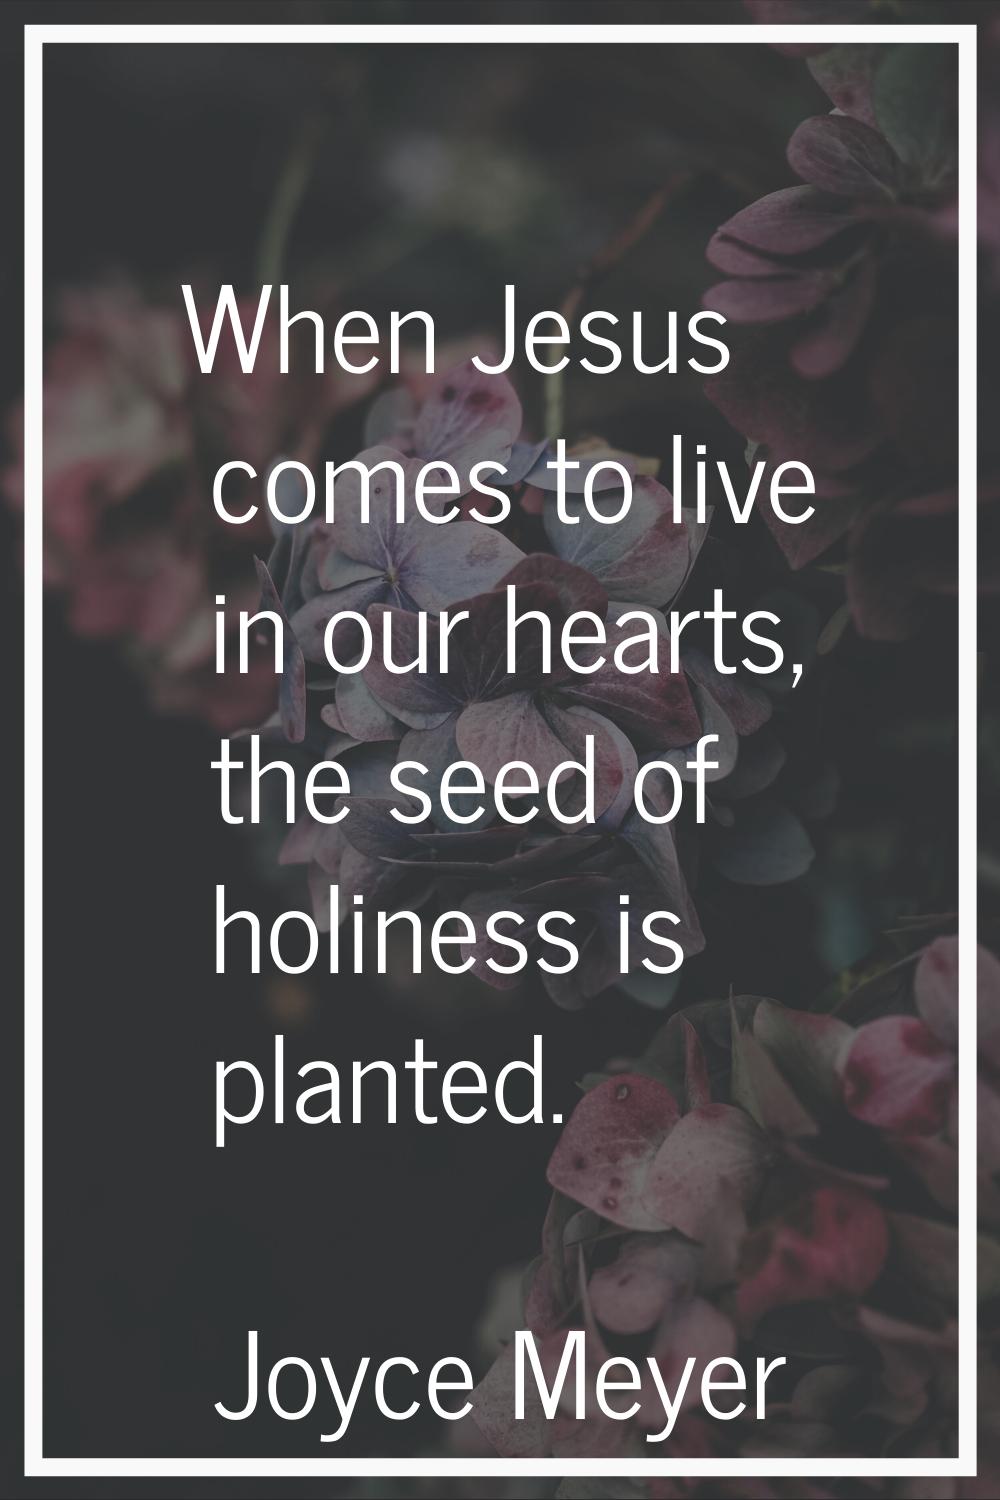 When Jesus comes to live in our hearts, the seed of holiness is planted.